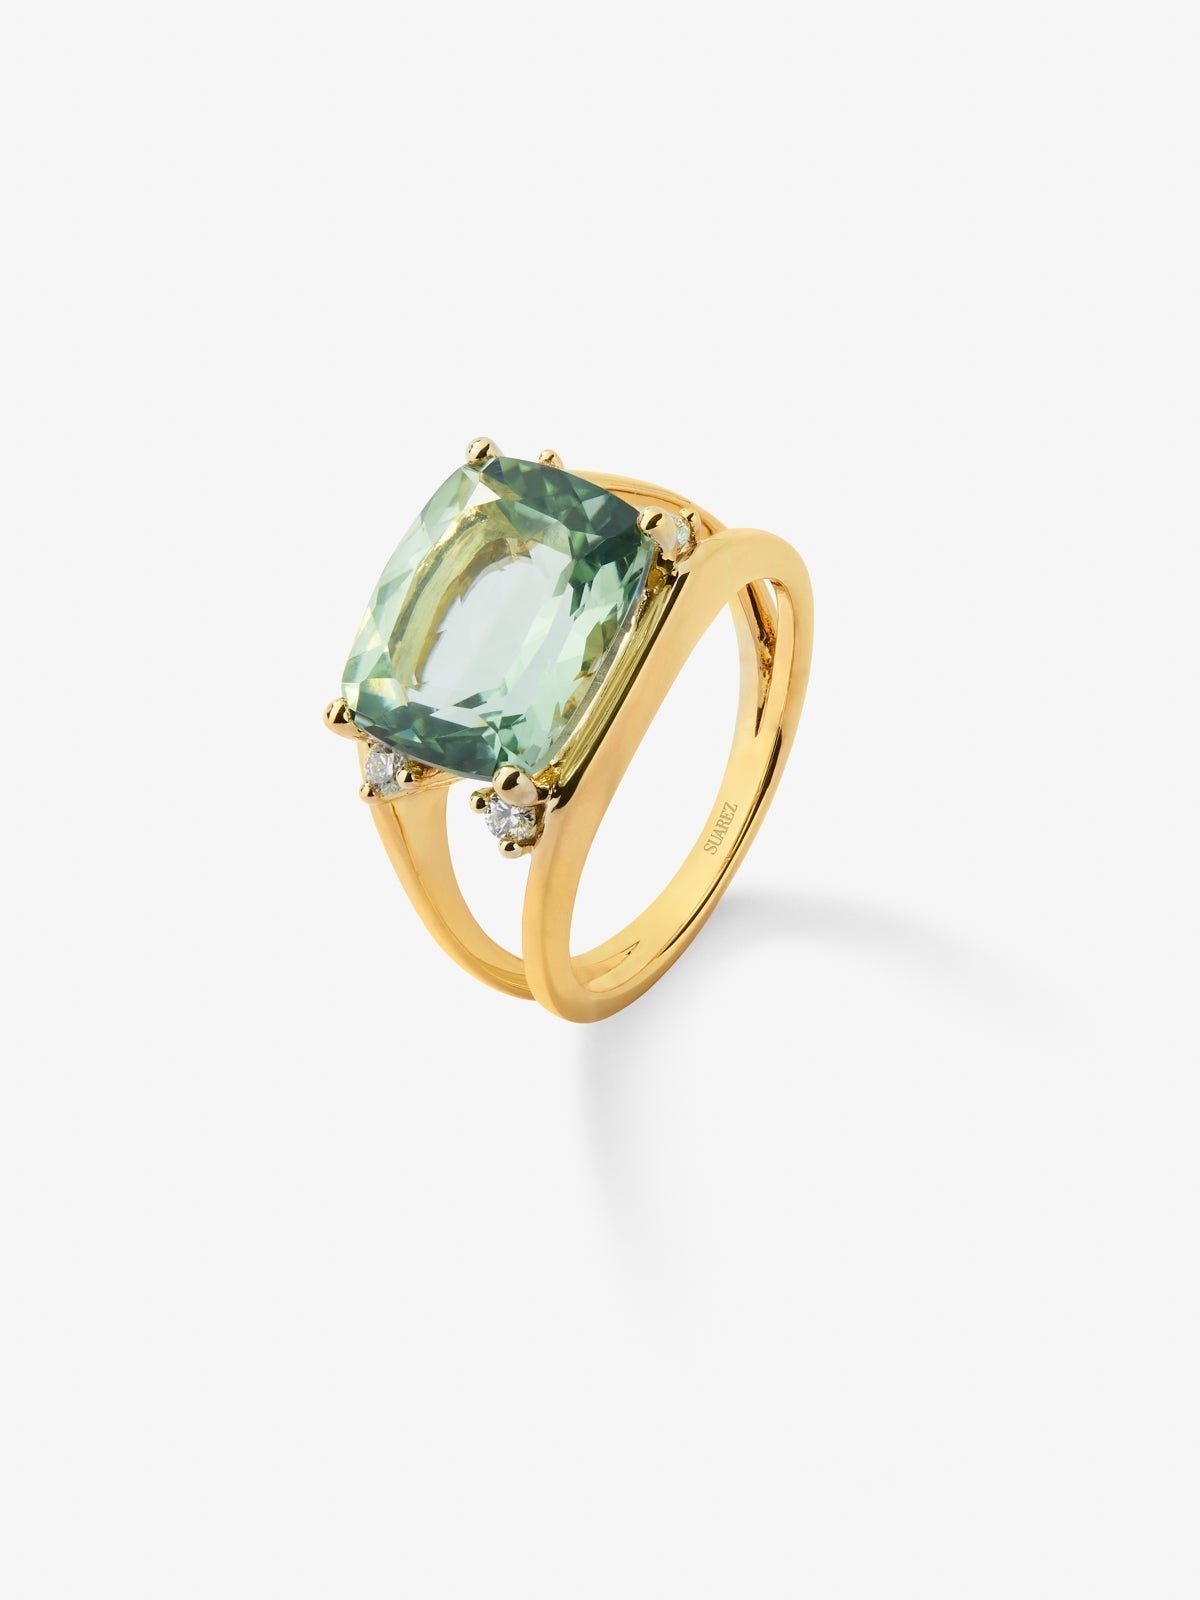 18K yellow gold ring with cushion-cut green amethyst of 7.3 cts and 4 brilliant-cut diamonds with a total of 0.13 cts